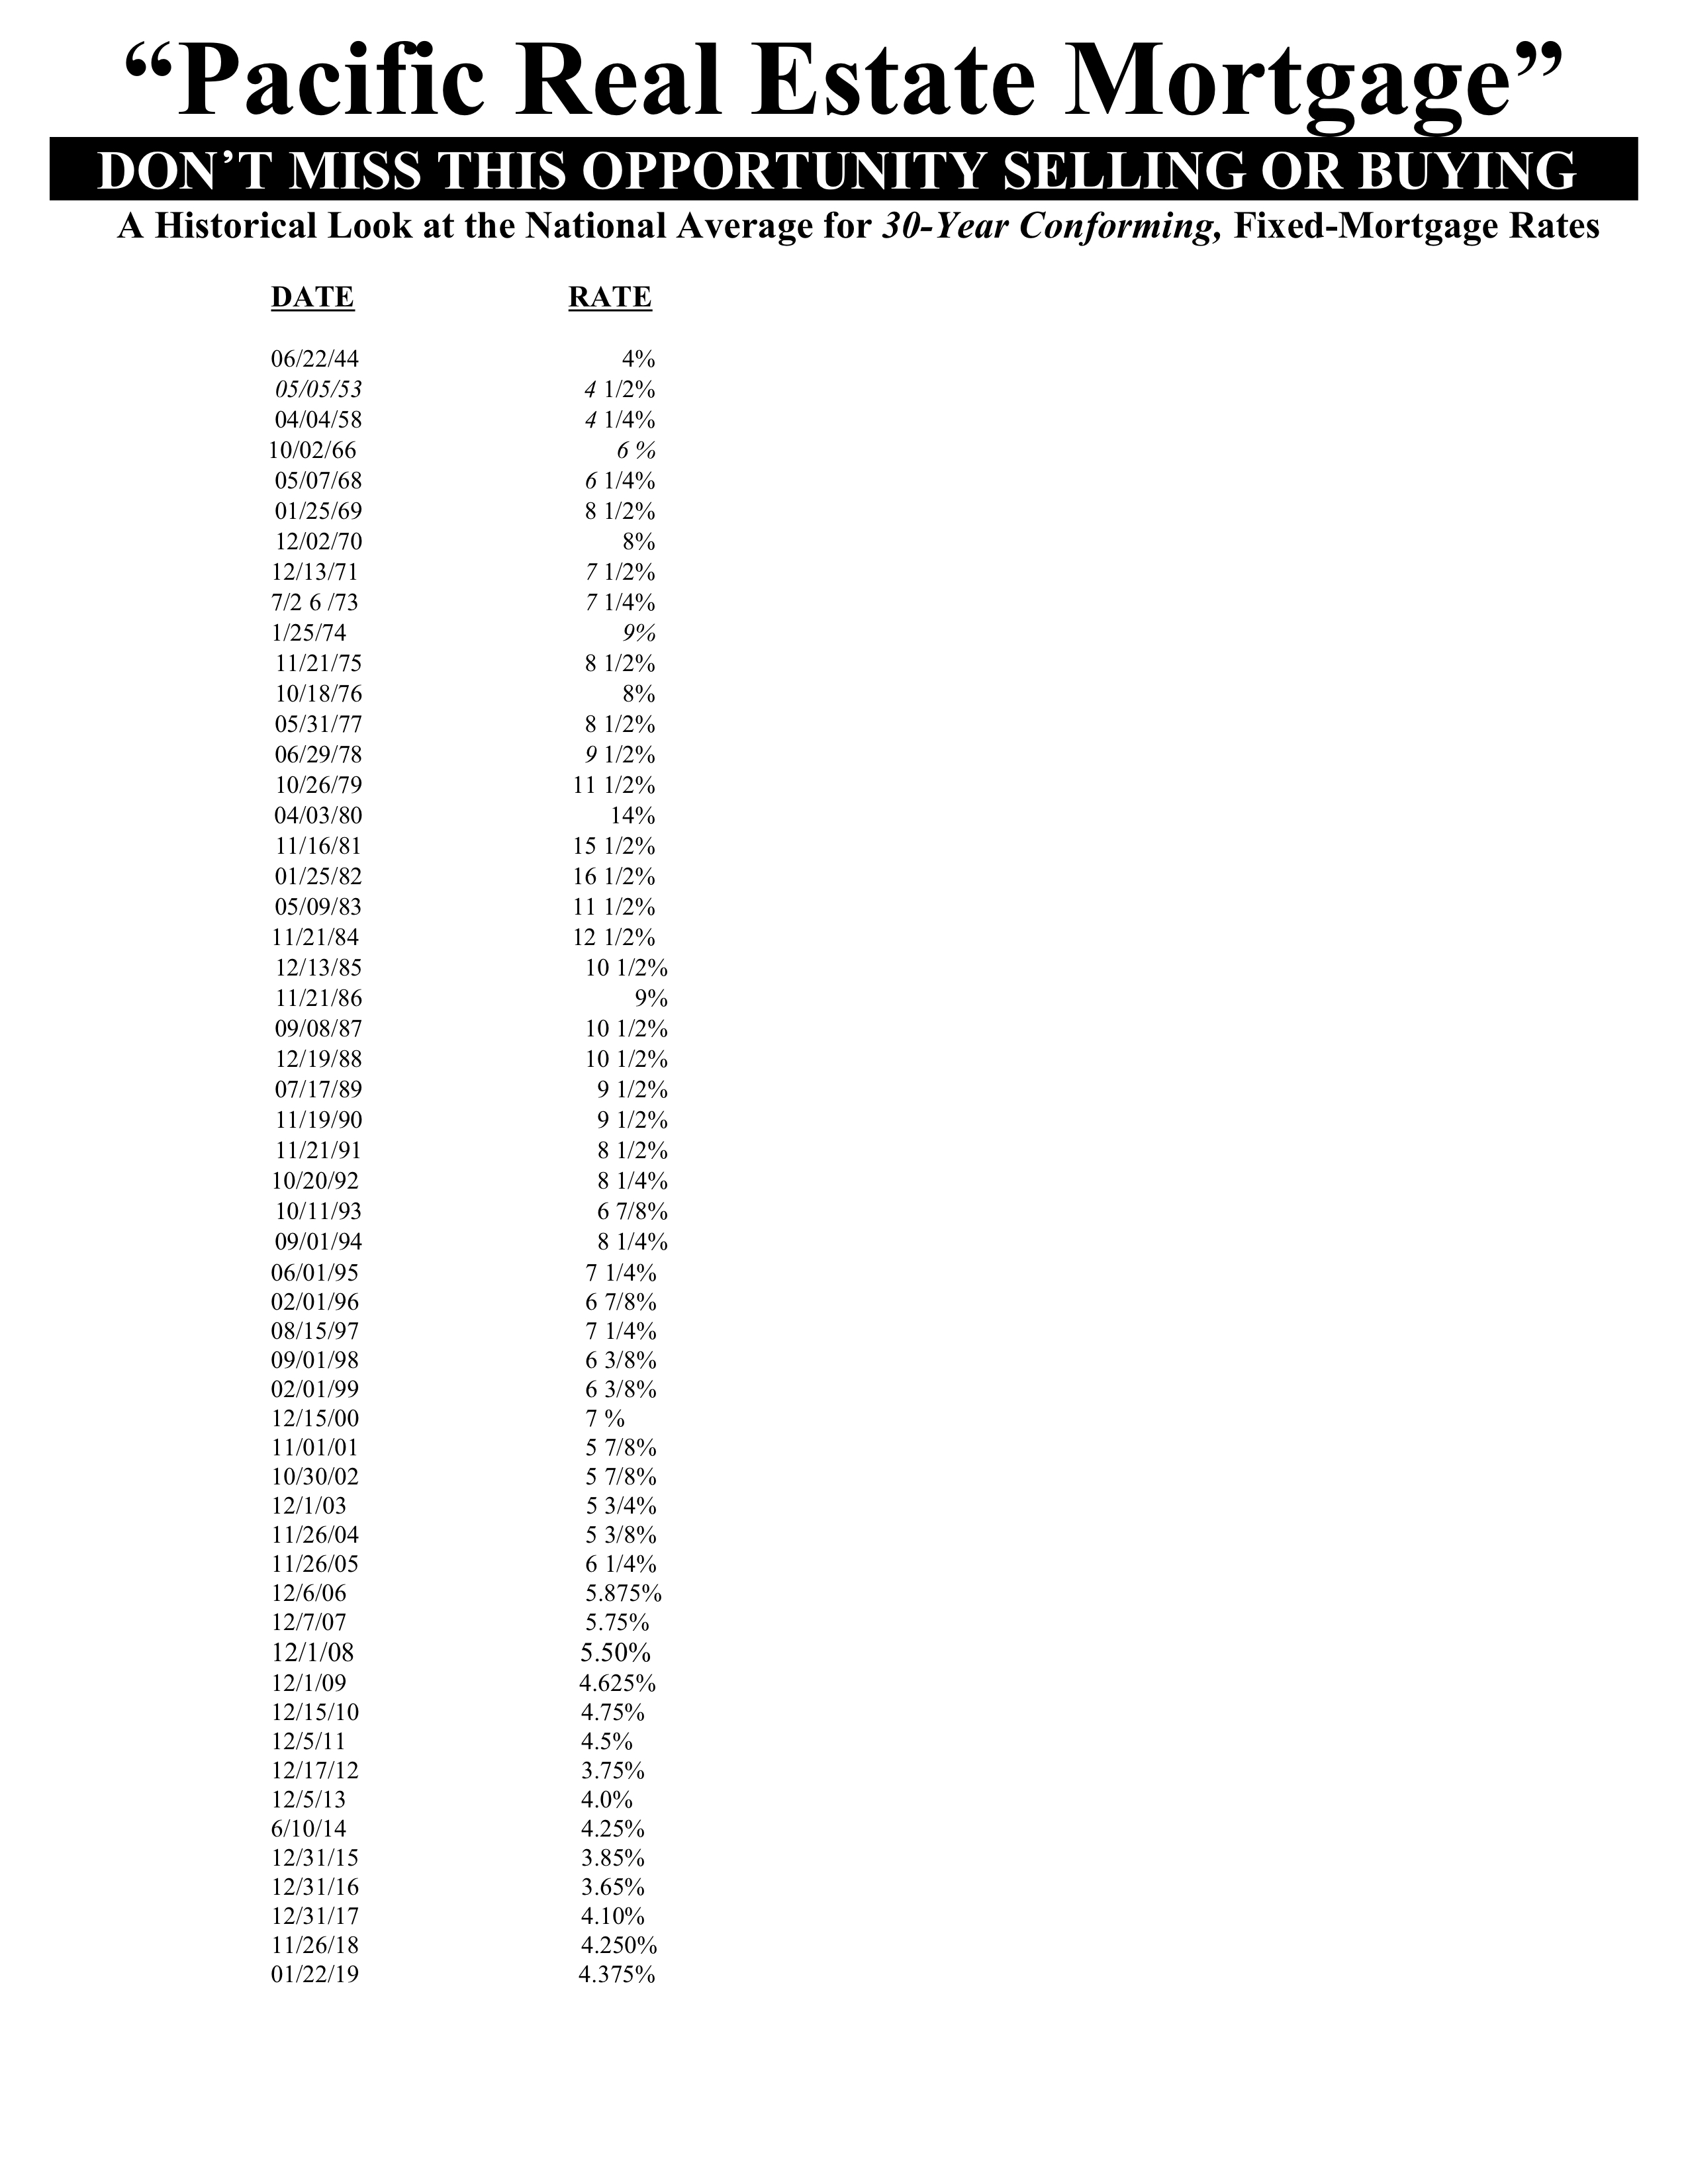 interest rates for last 75 years 12-1-09